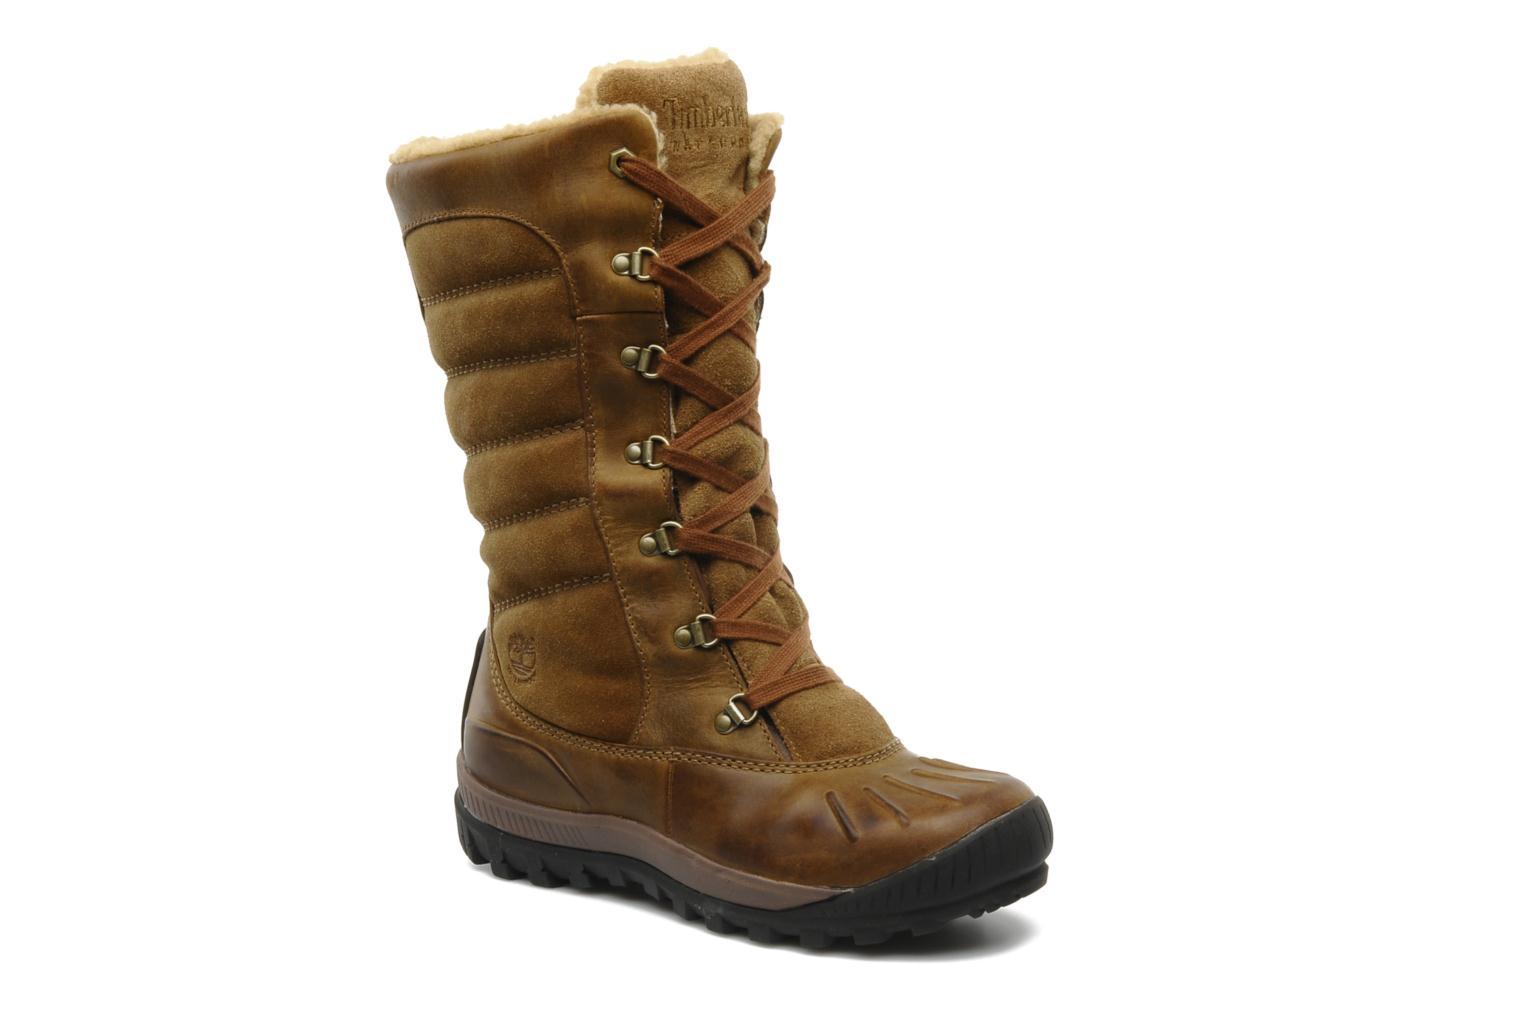 Foto Boots y Botines Timberland Earthkeepers Mount Holly Boot Mujer foto 54582